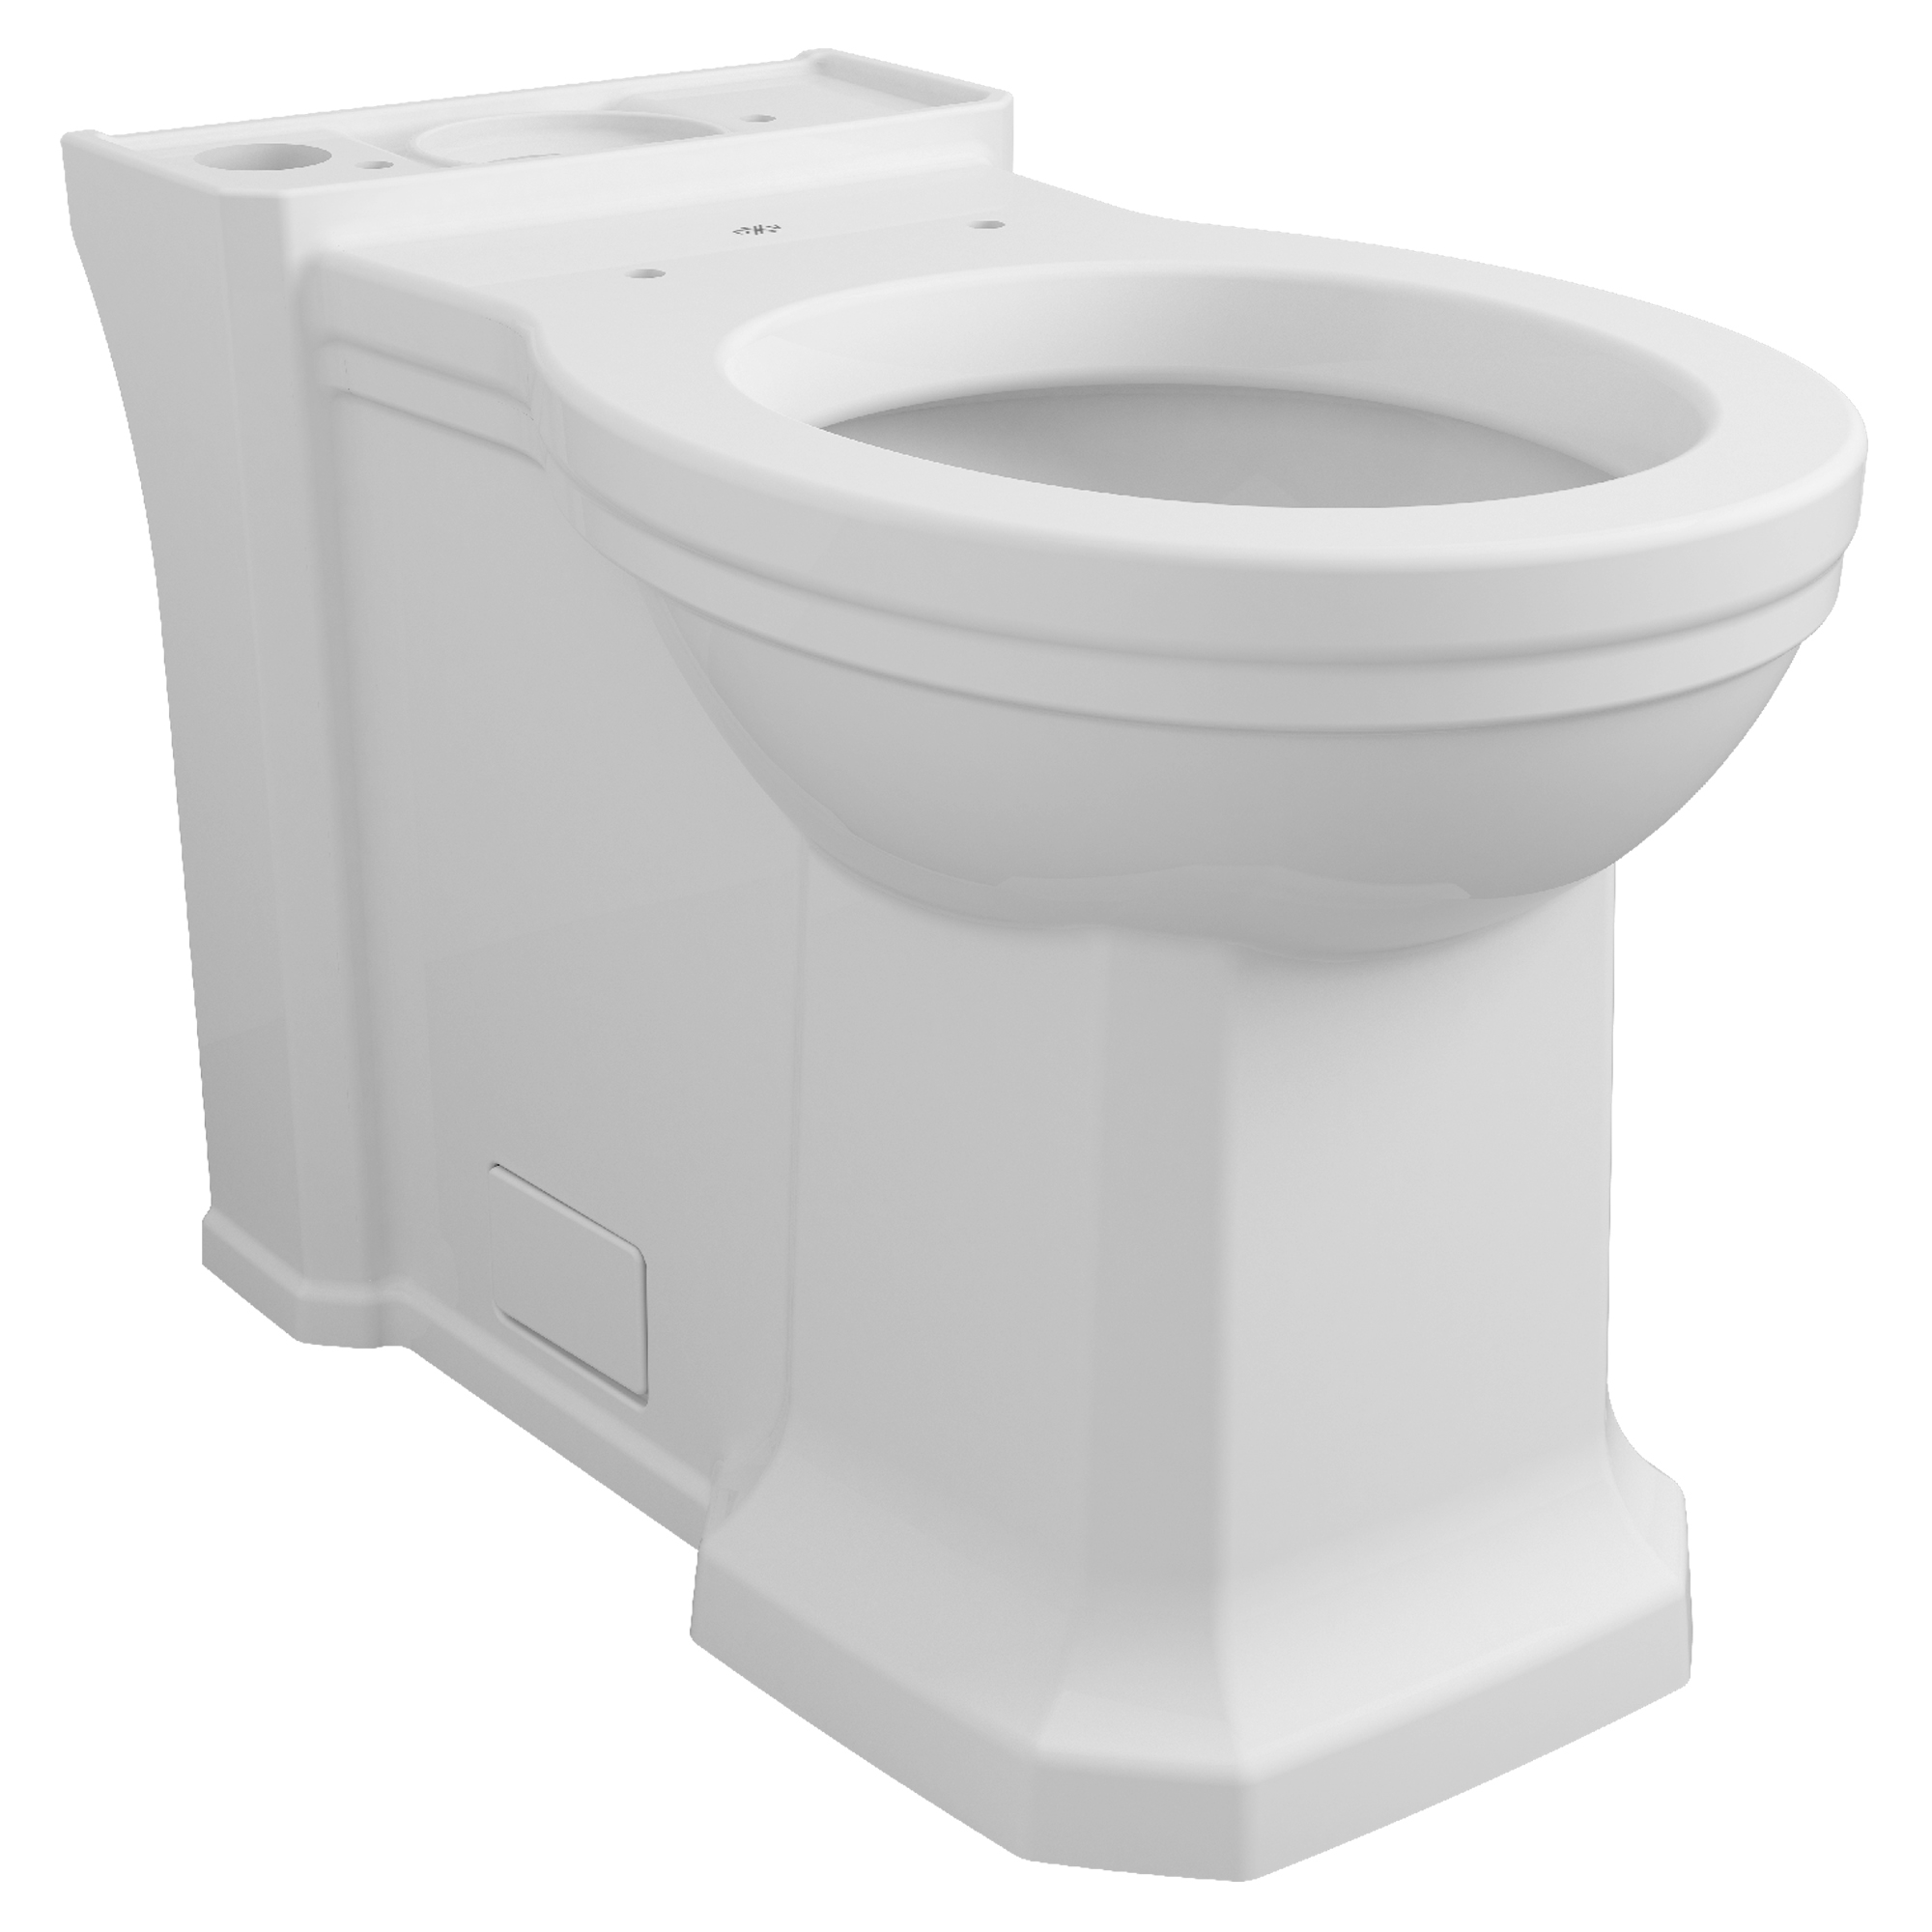 Fitzgerald Chair Height Elongated Toilet Bowl with Seat